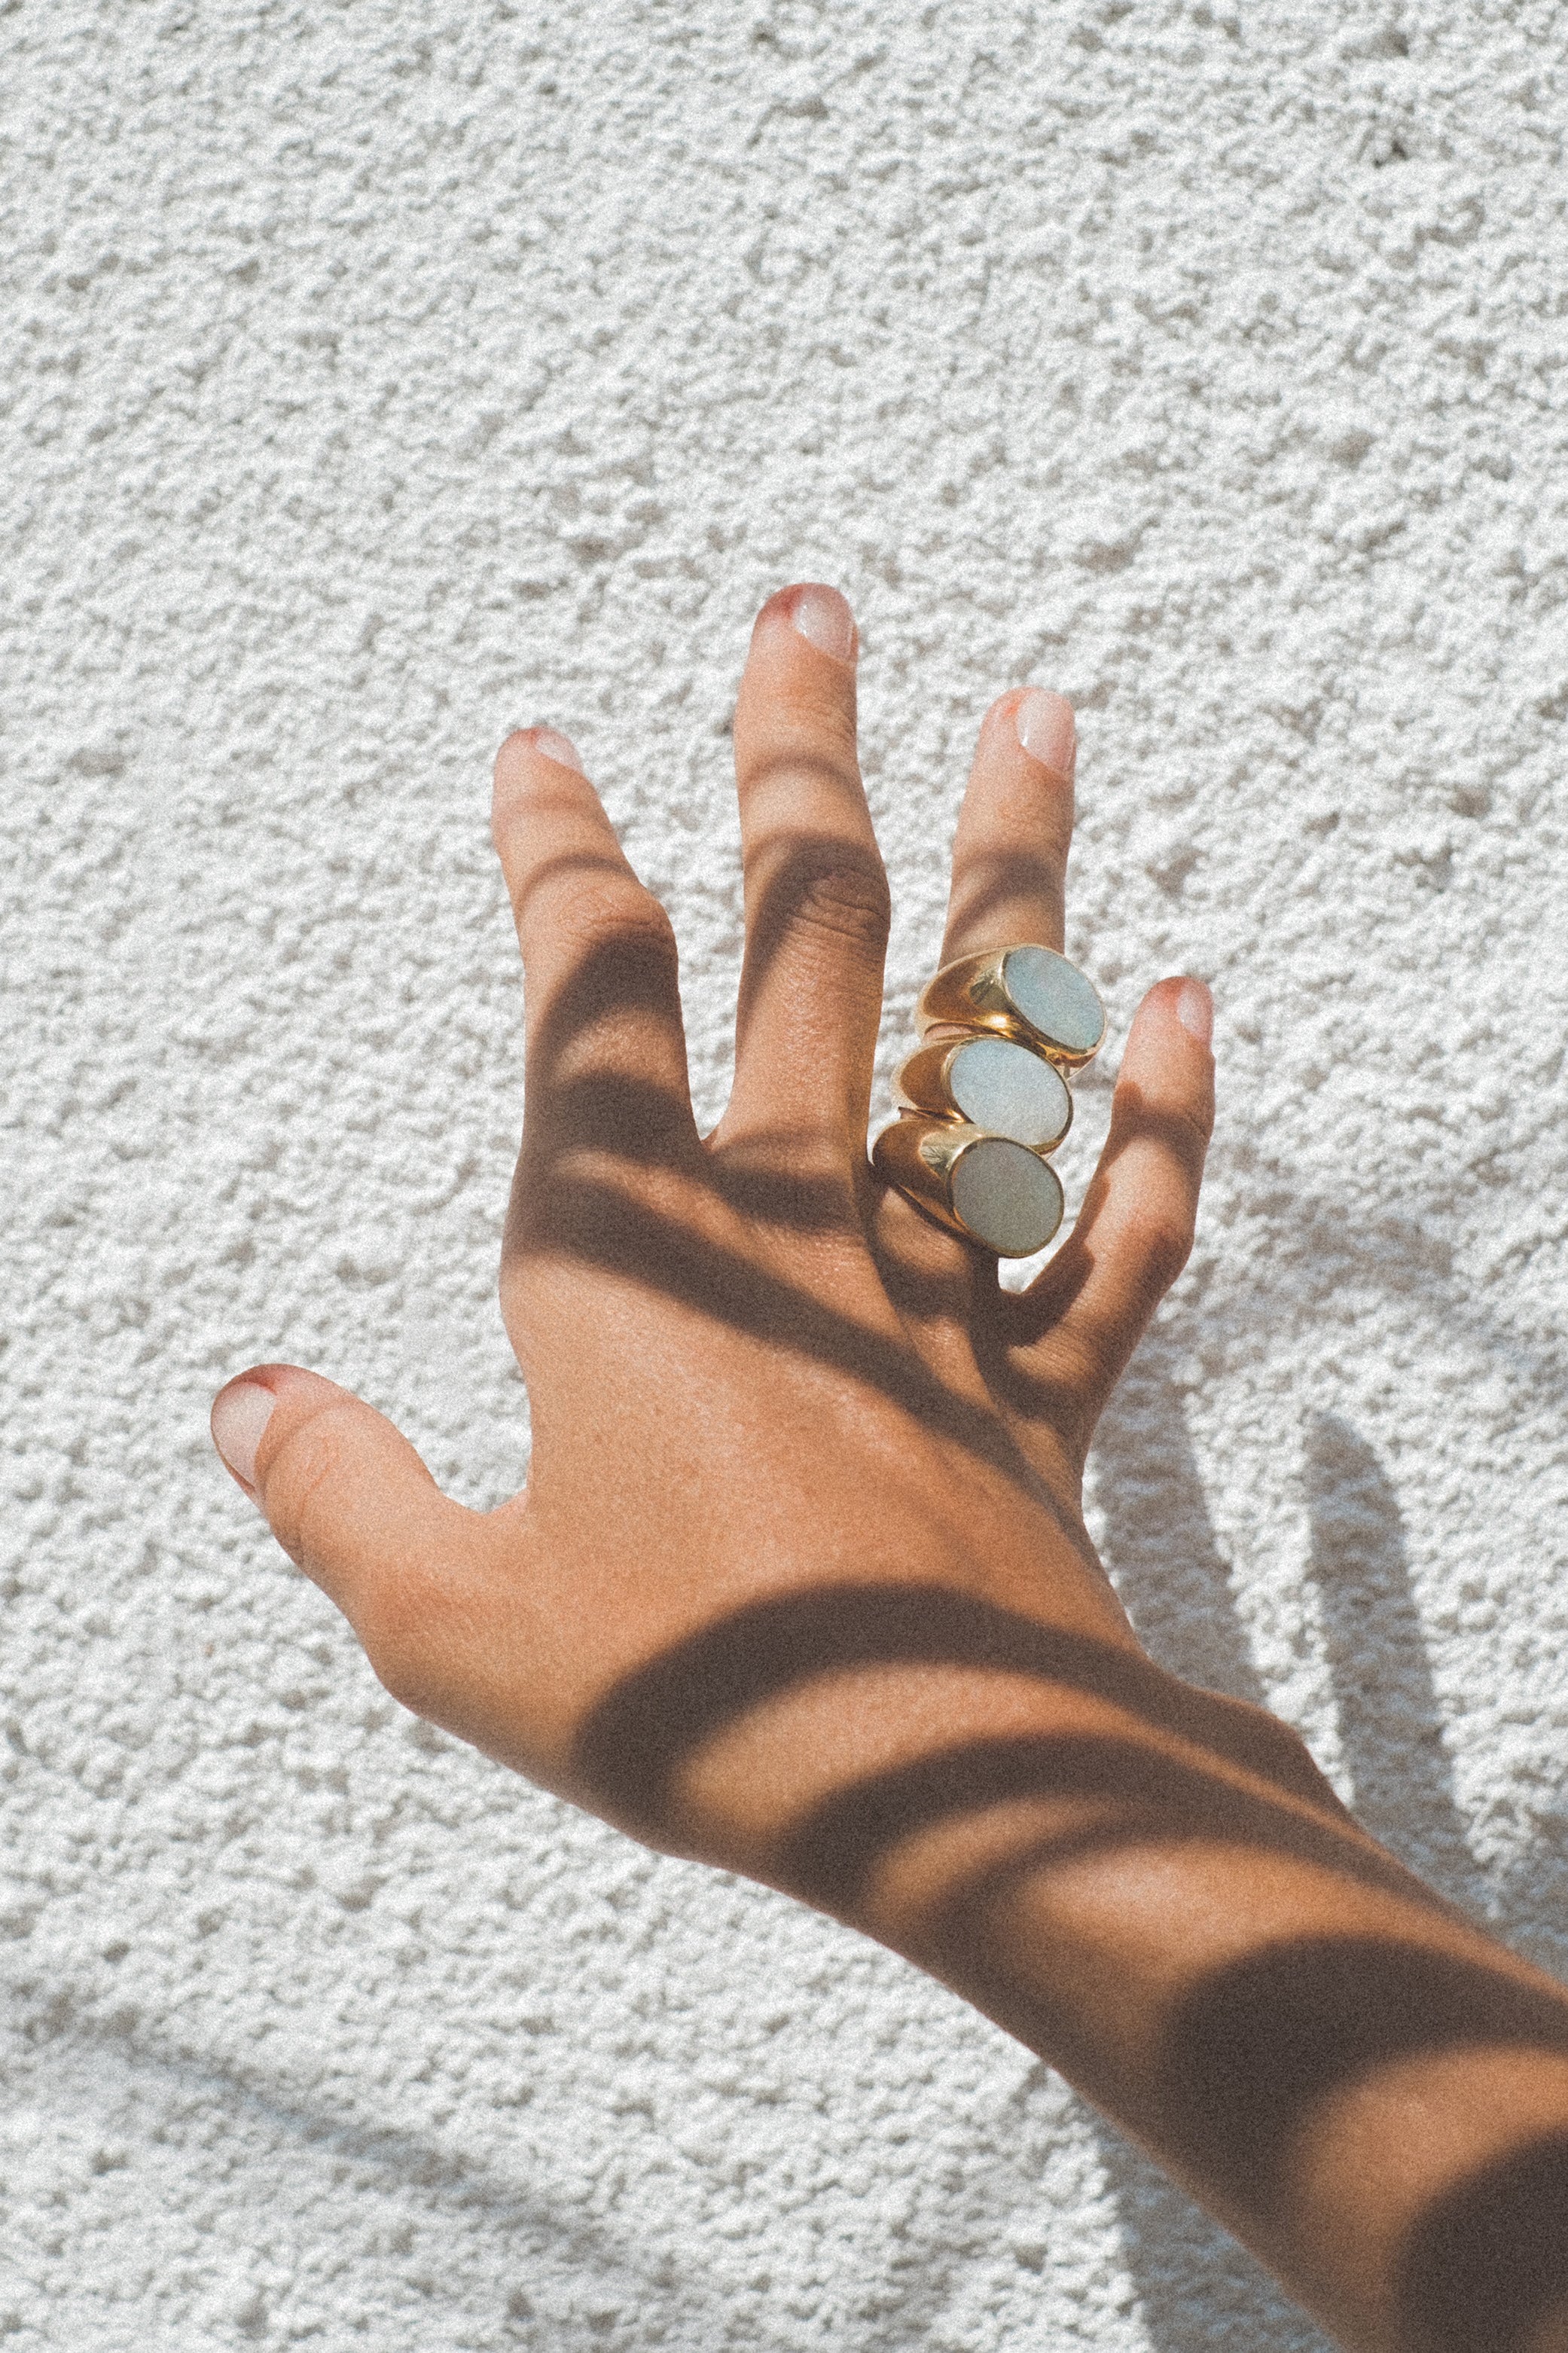 Adorn Signet Ring - Gold w/ Mother of Pearl - RUM Amsterdam